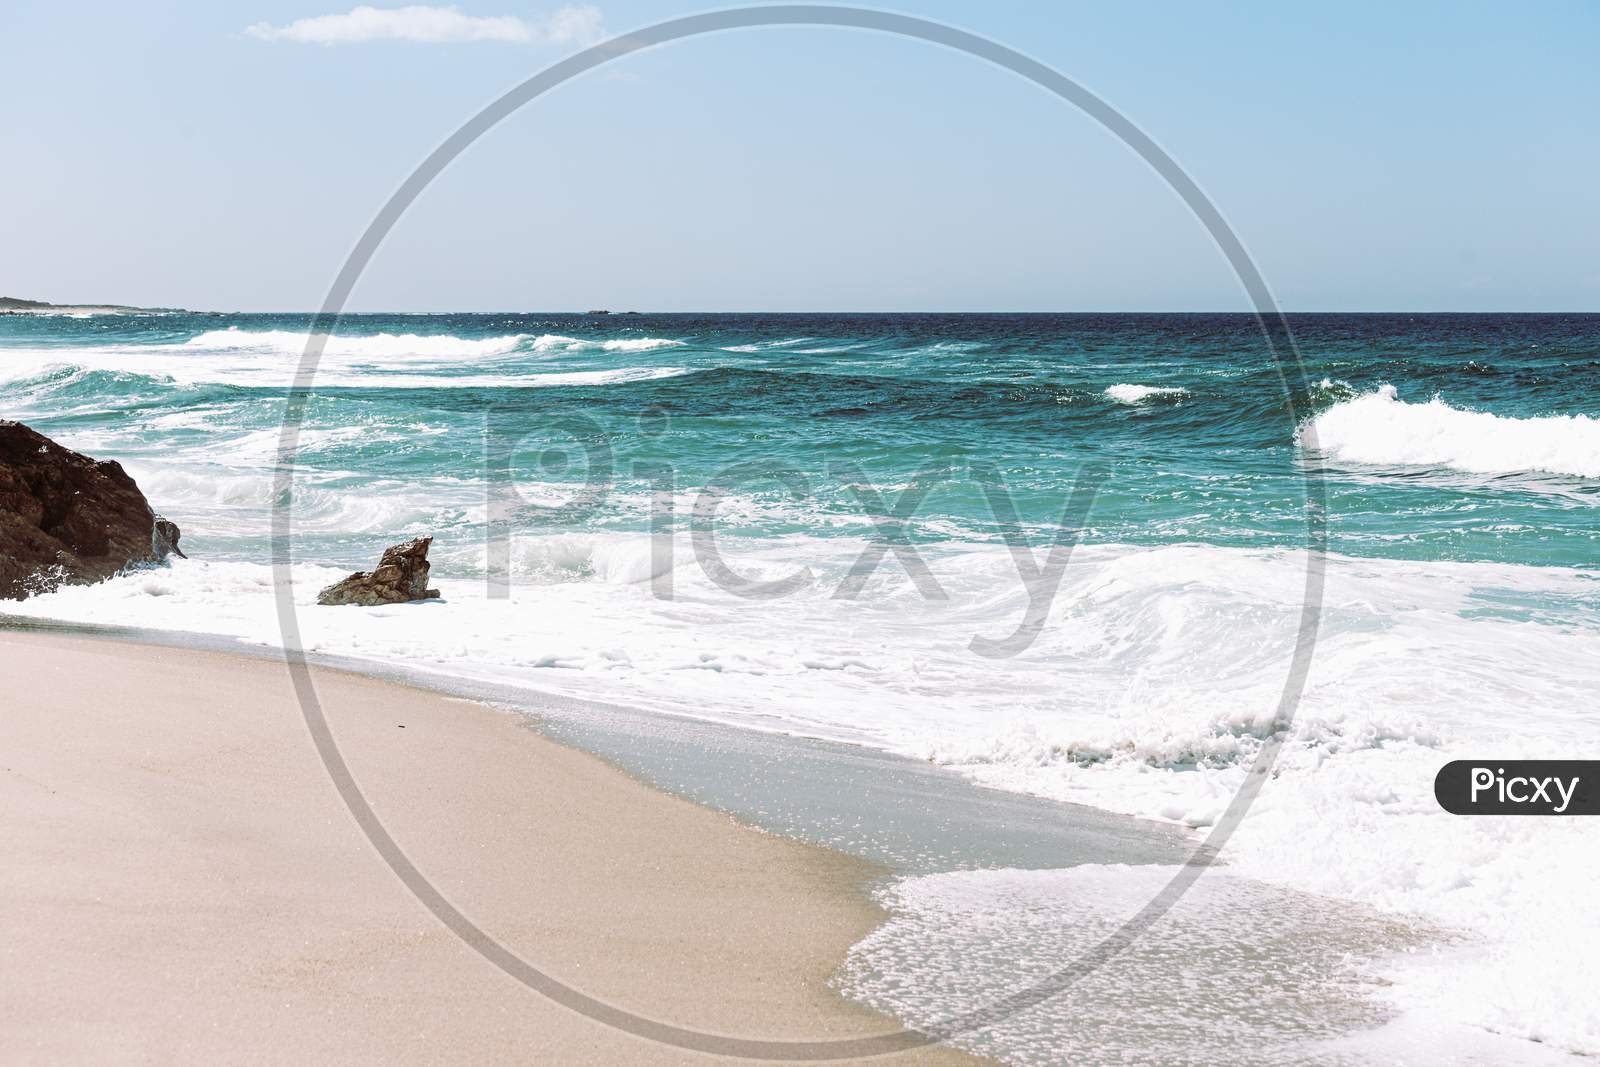 Bright And Relaxing Image Of A Wild Beach During A Sunny Day